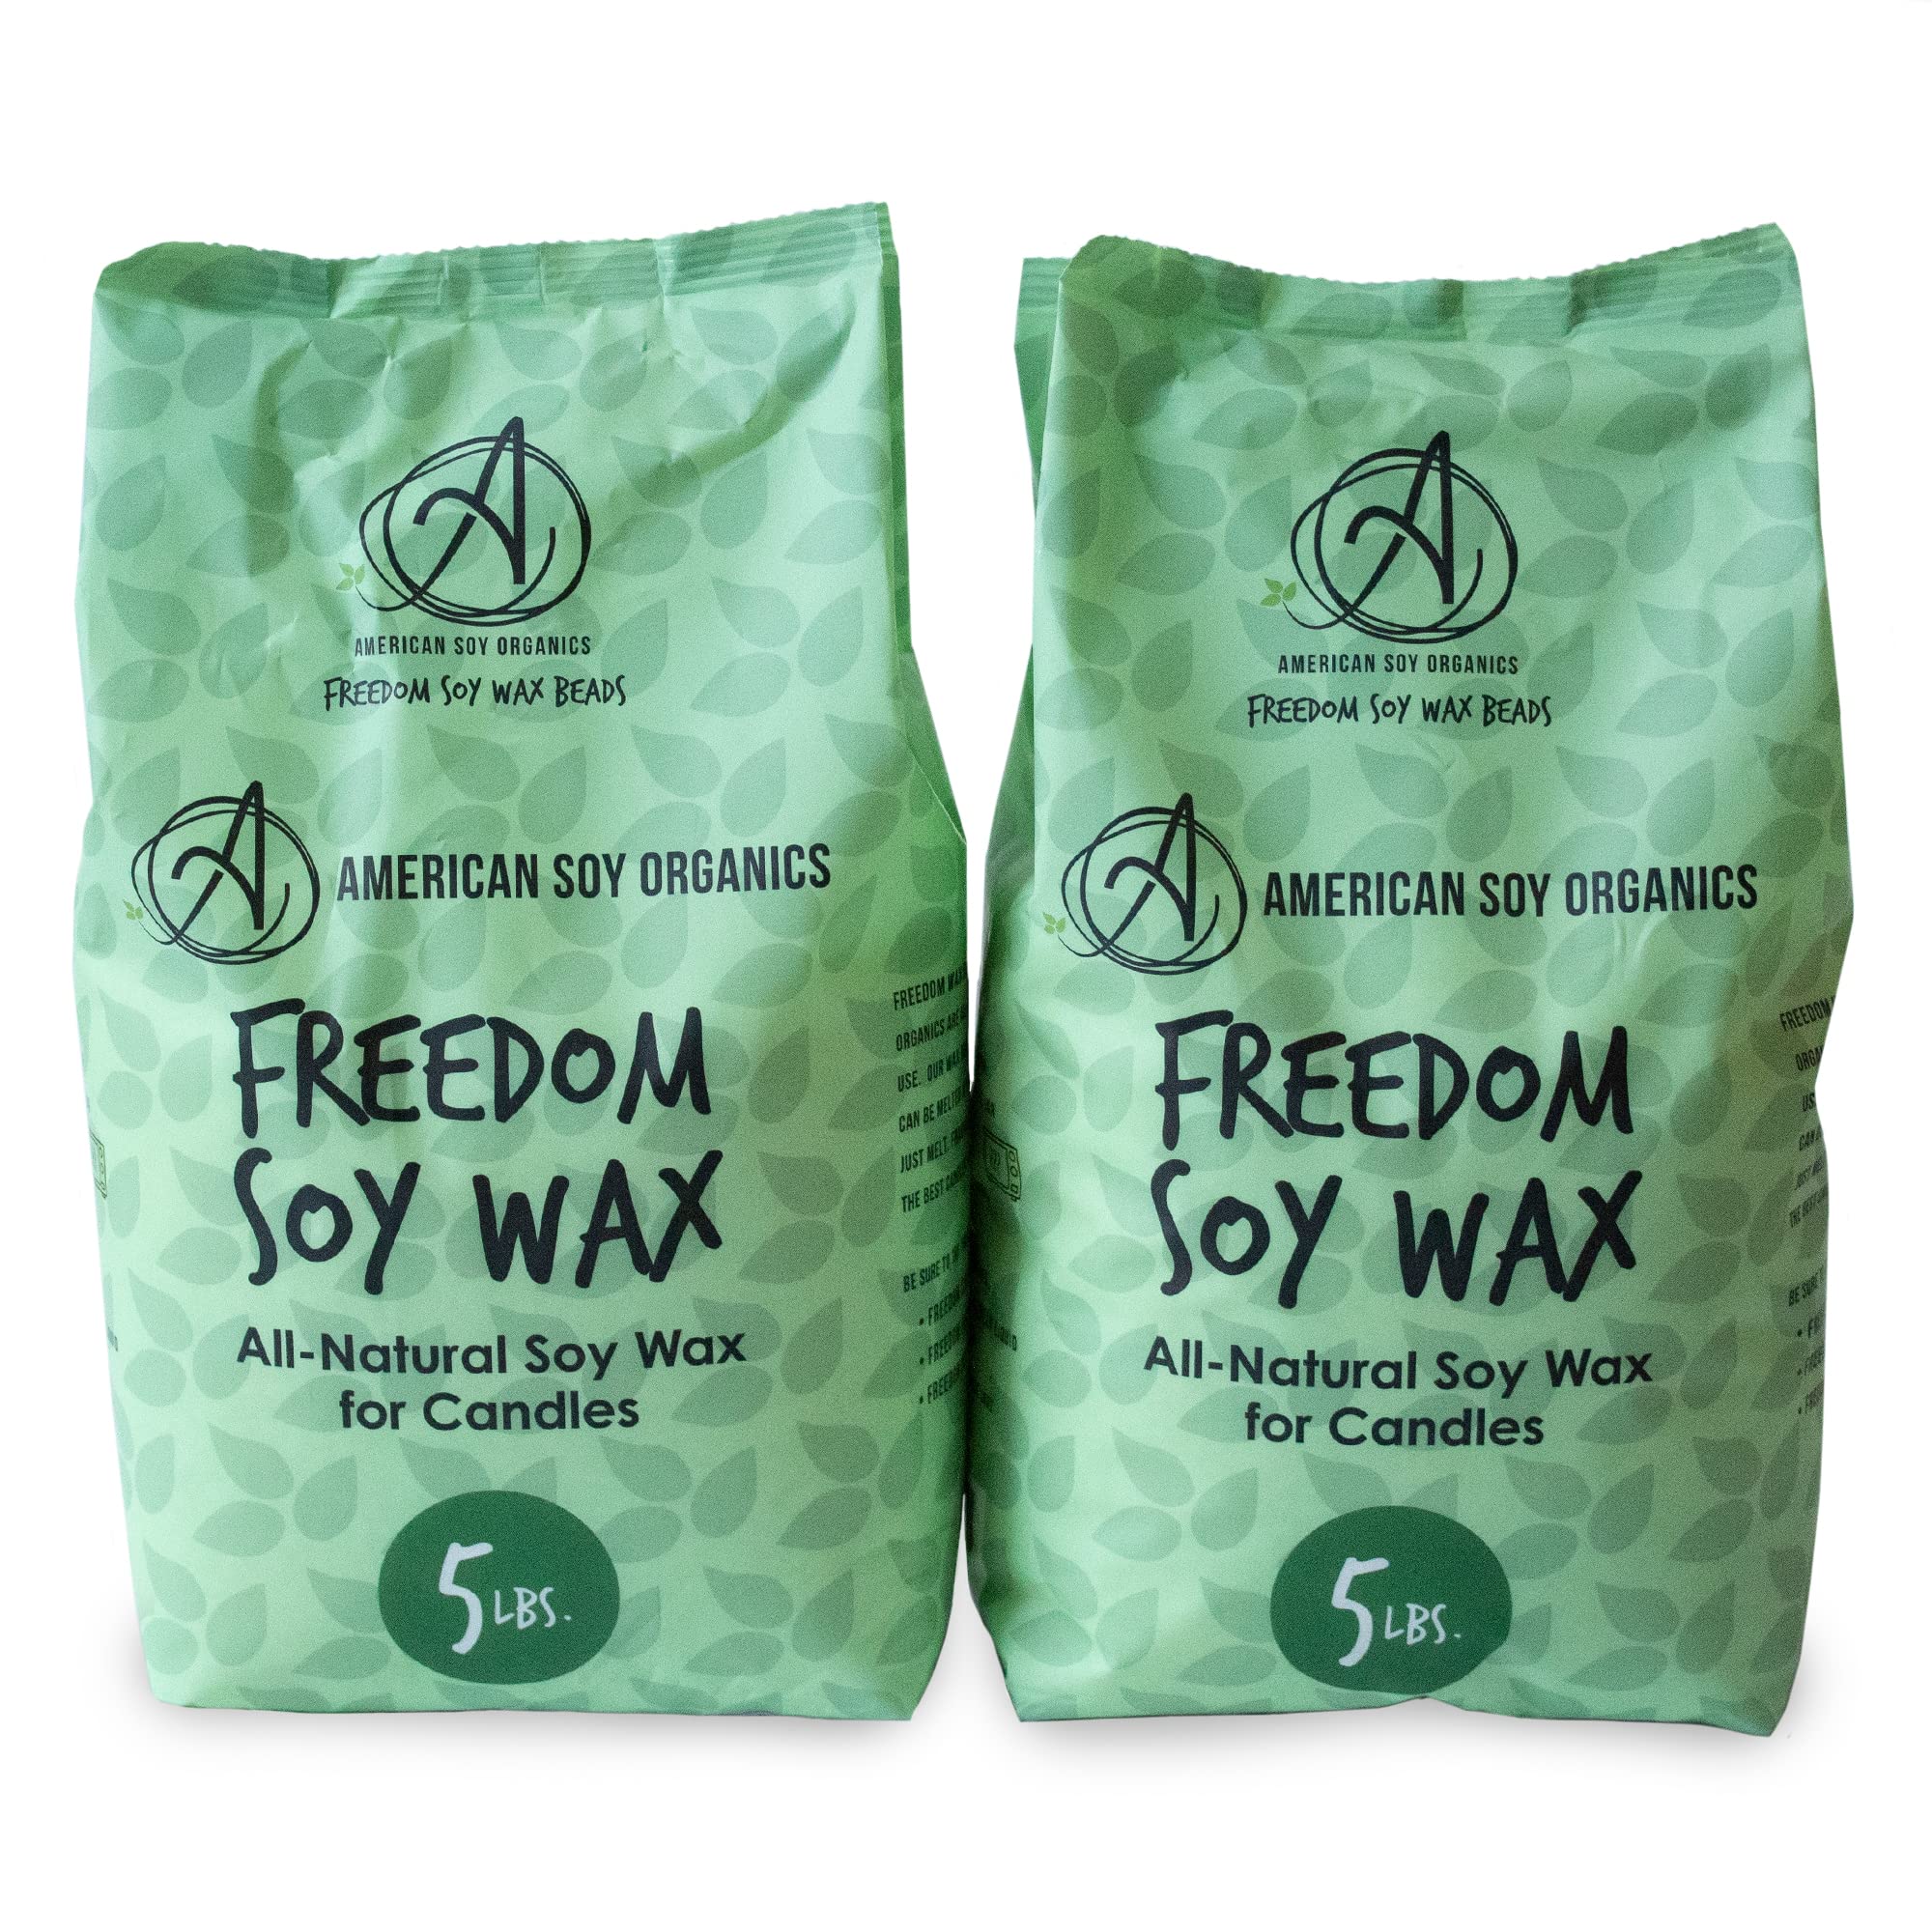 American Soy Organics- 10 lb of Freedom Soy Wax Beads for Candle Making  Microwavable Soy Wax Beads Premium Soy Candle Making Supplies 10lb